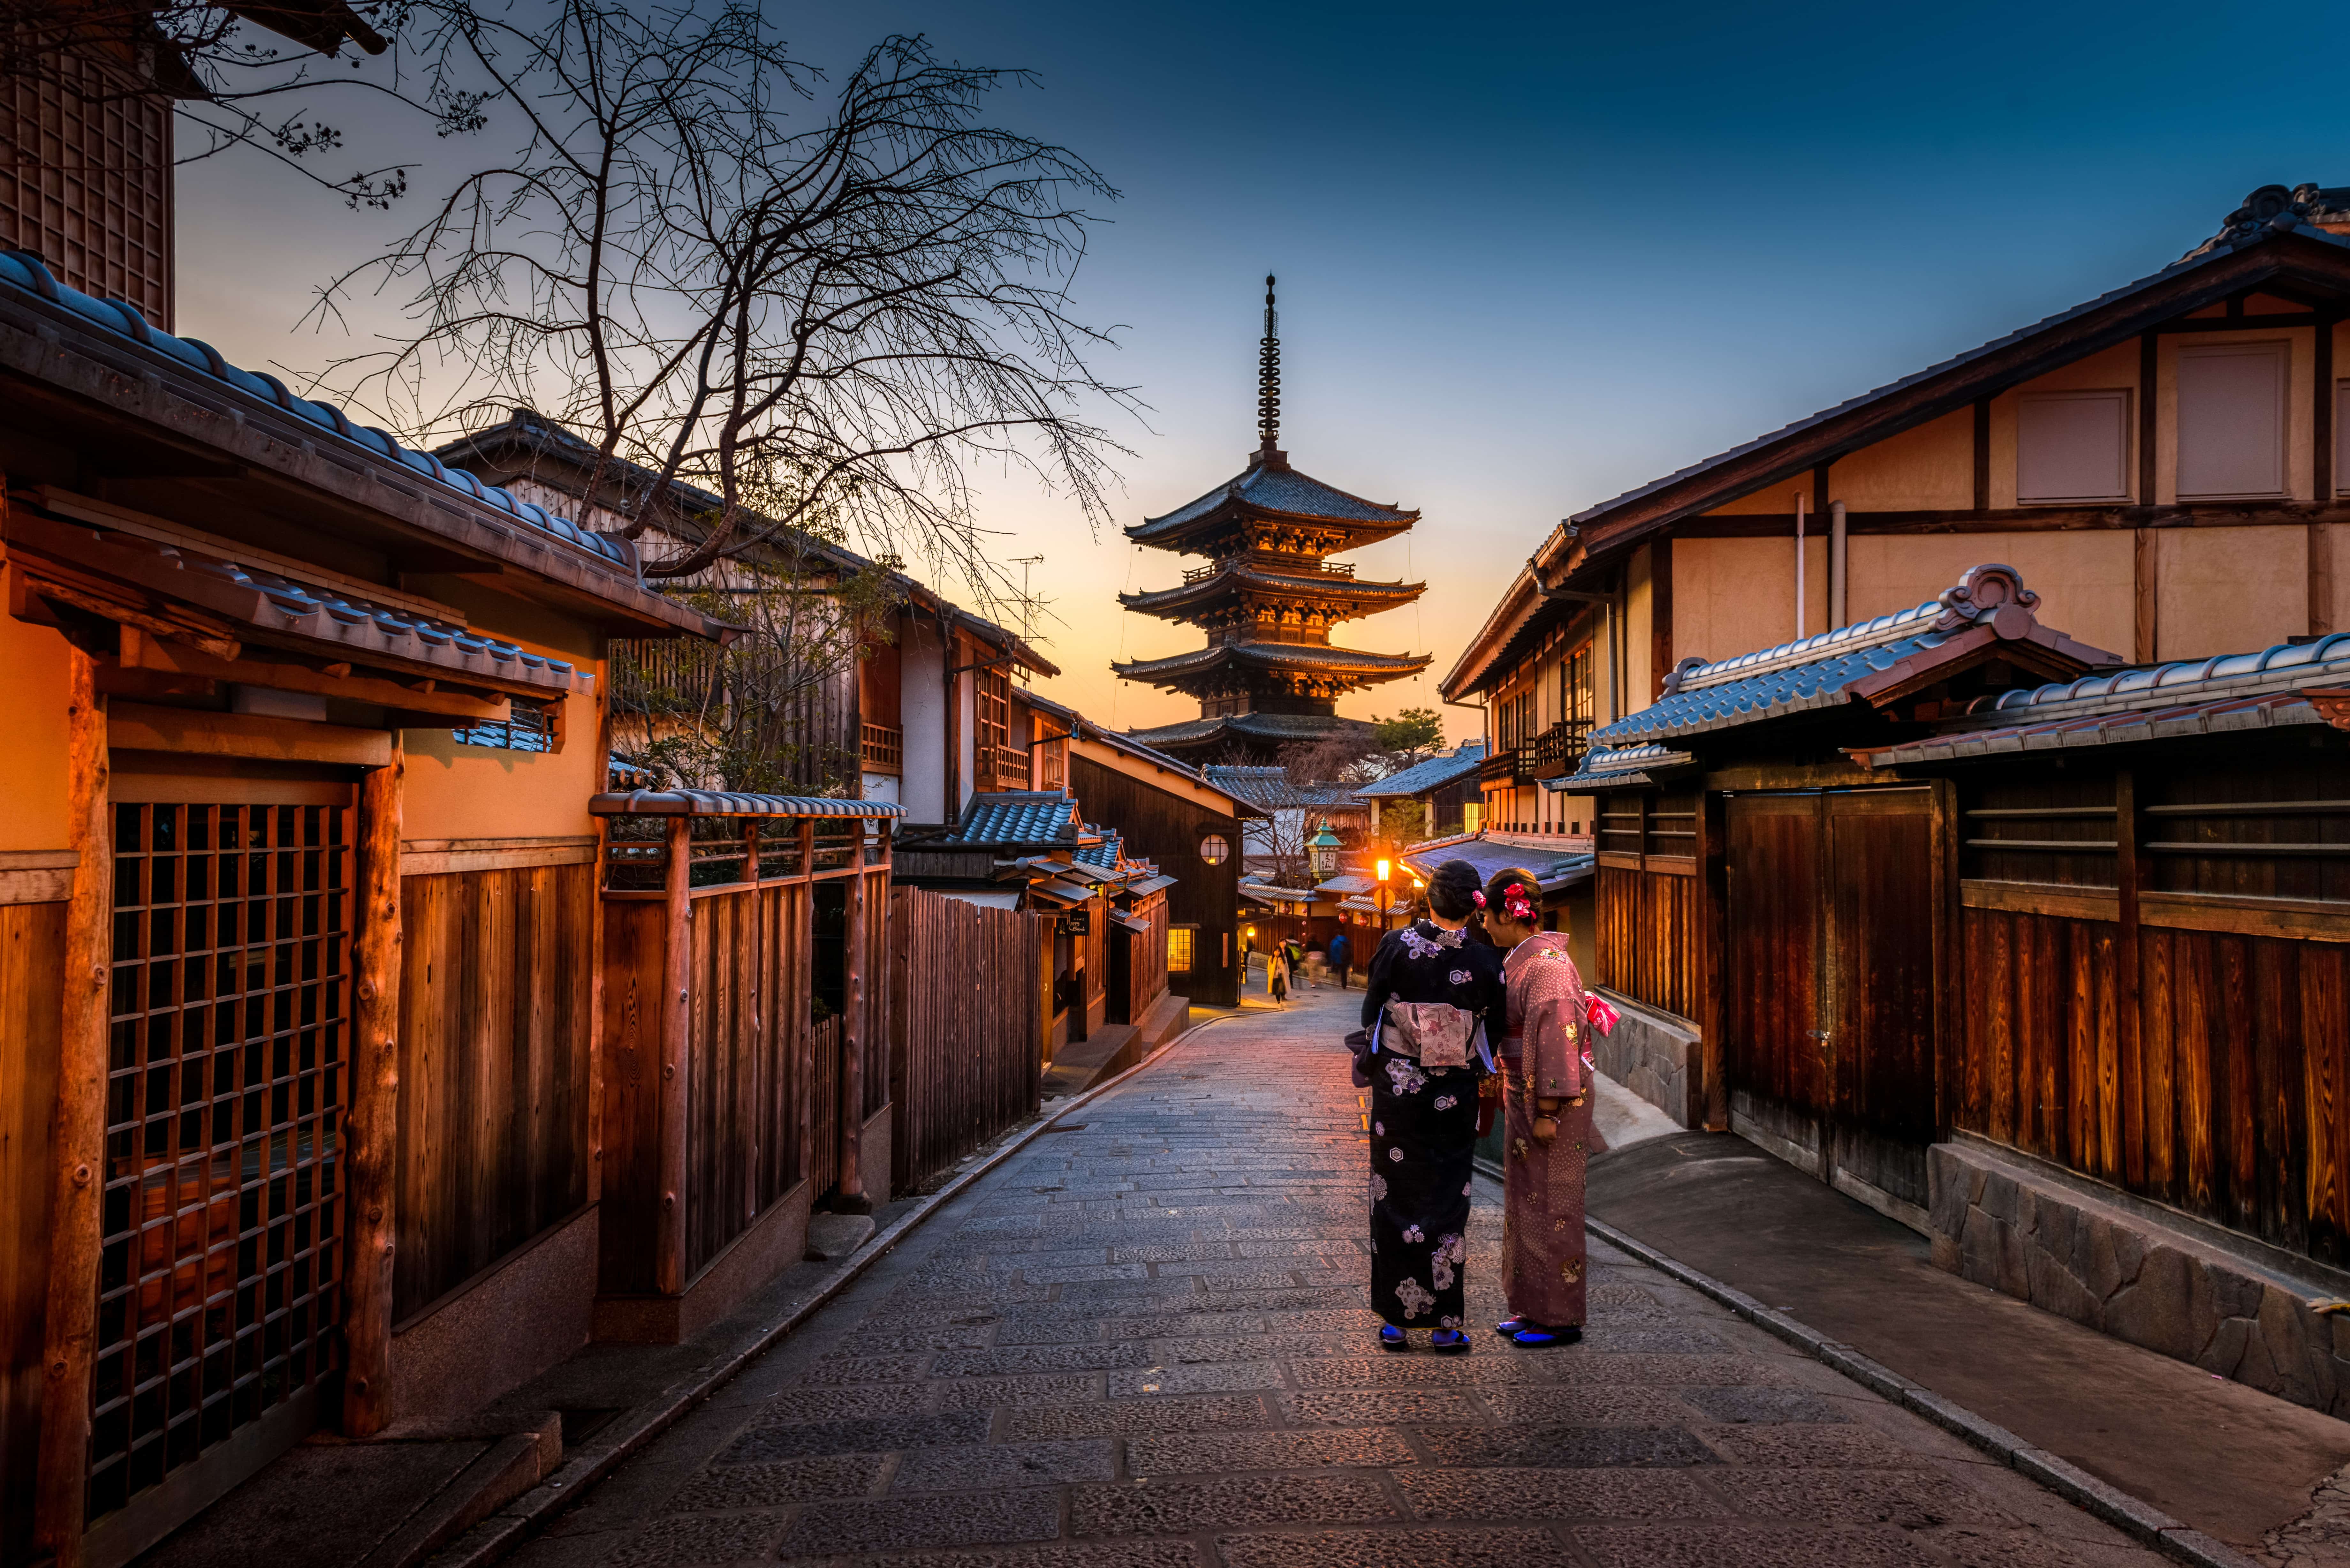 Two Japanese women in traditional dress walk down a Kyoto street